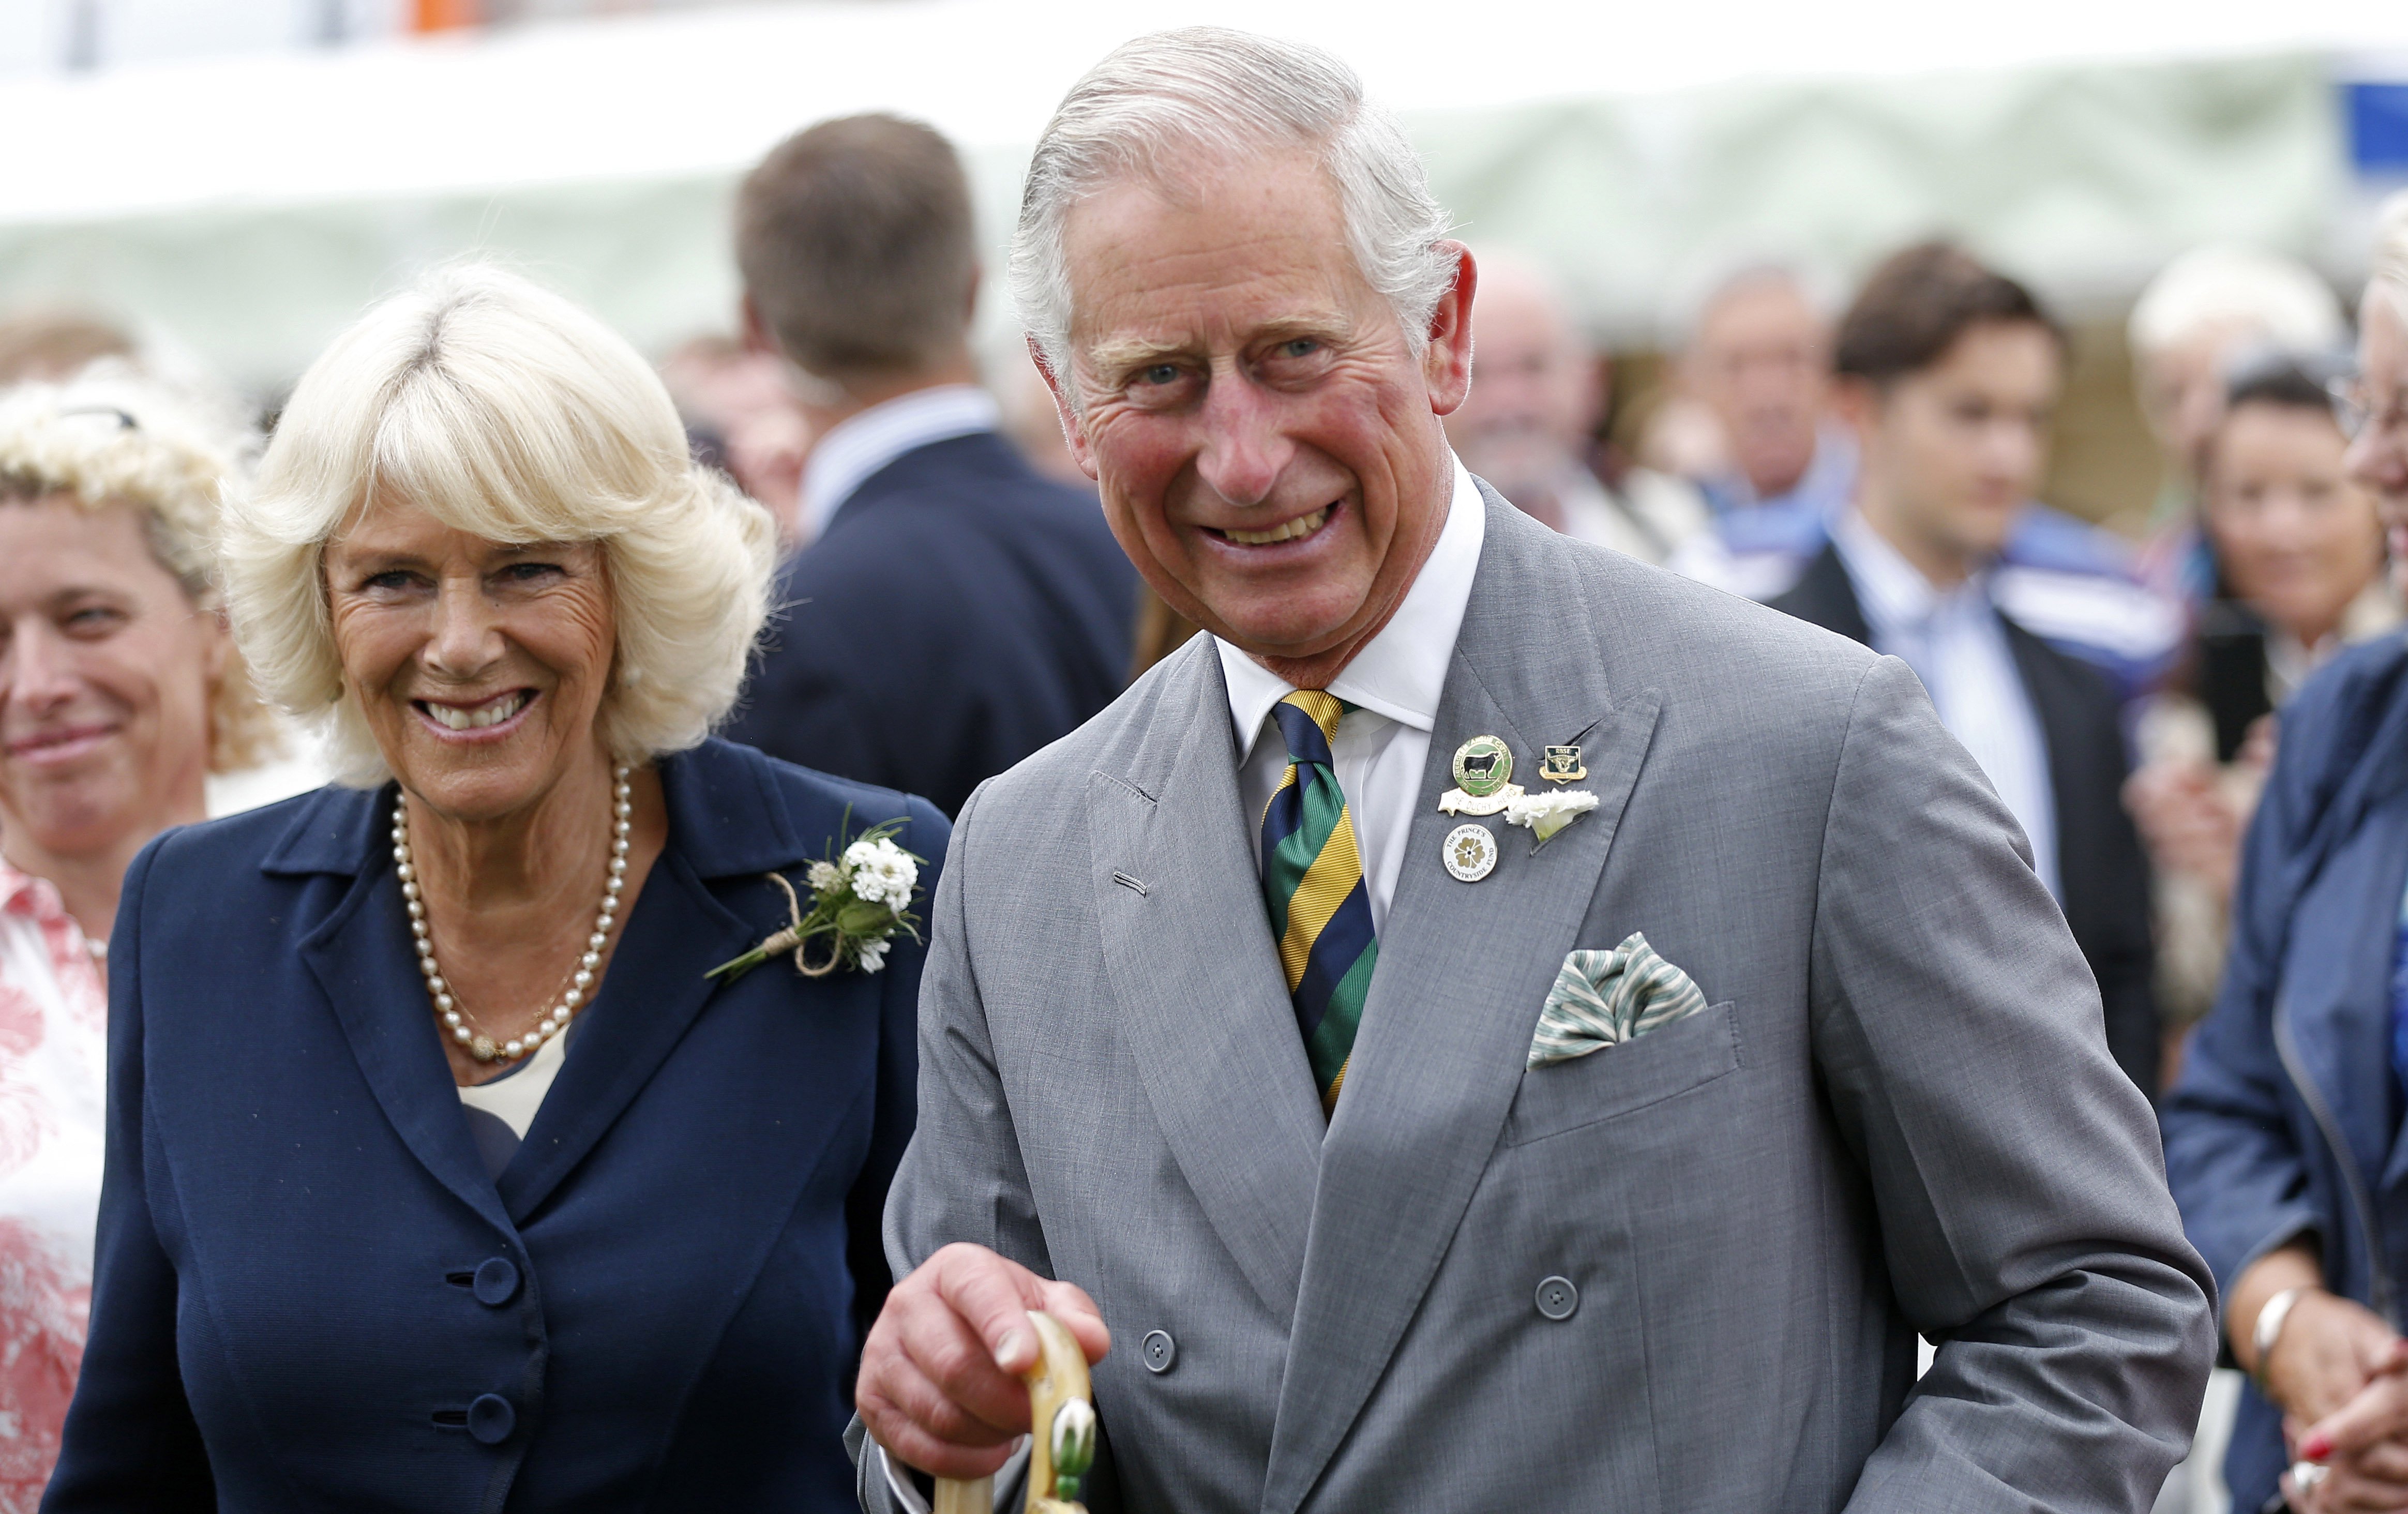 Camilla, Duchess of Cornwall and Prince Charles, Prince of Wales attend The Great Yorkshire Show on July 14, 2015 | Photo: GettyImages